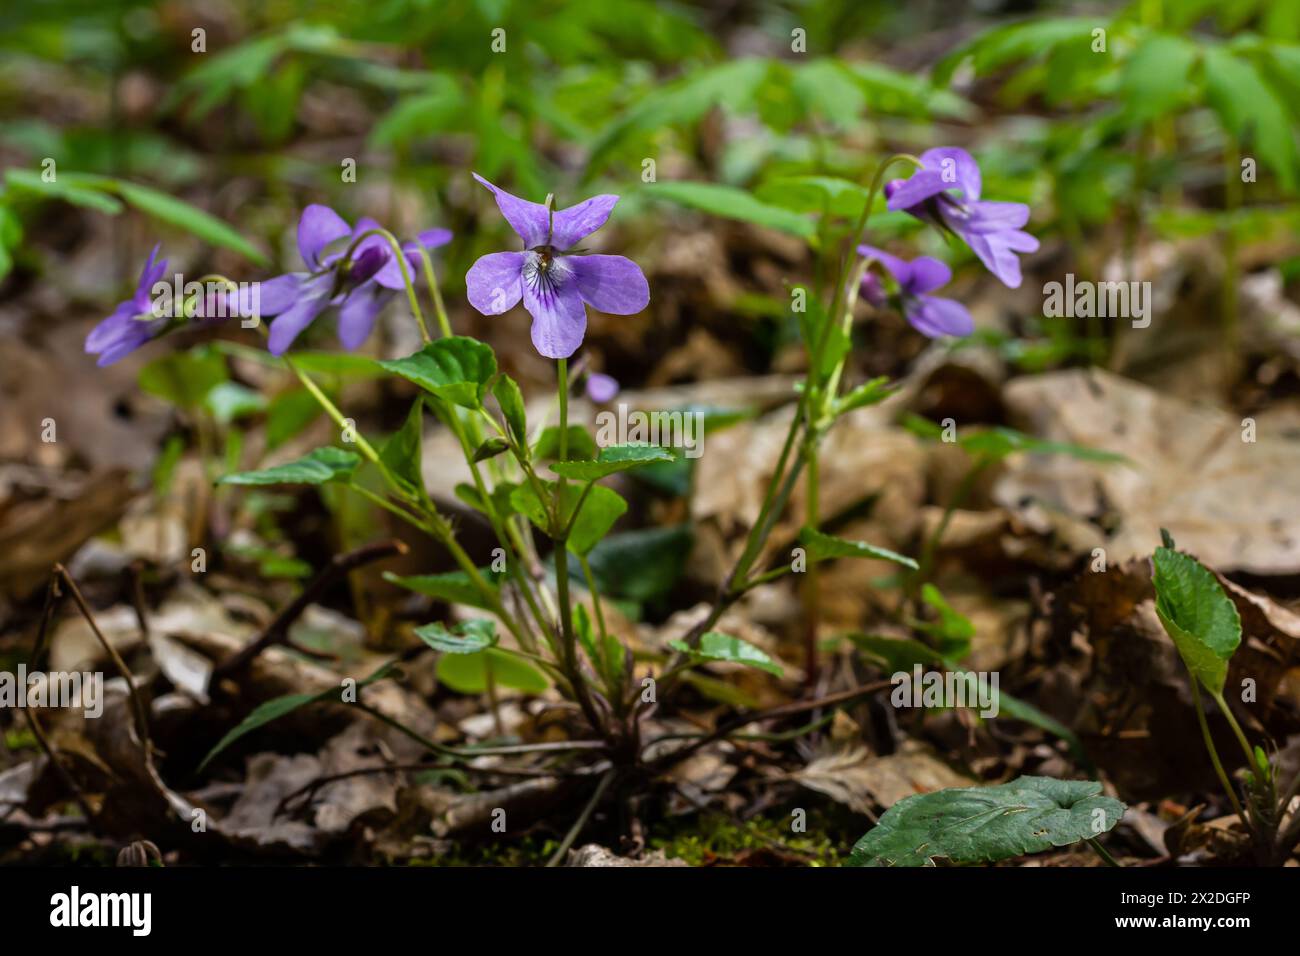 Viola odorata. Scent-scented. Violet flower forest blooming in spring. The first spring flower, purple. Wild violets in nature. Stock Photo